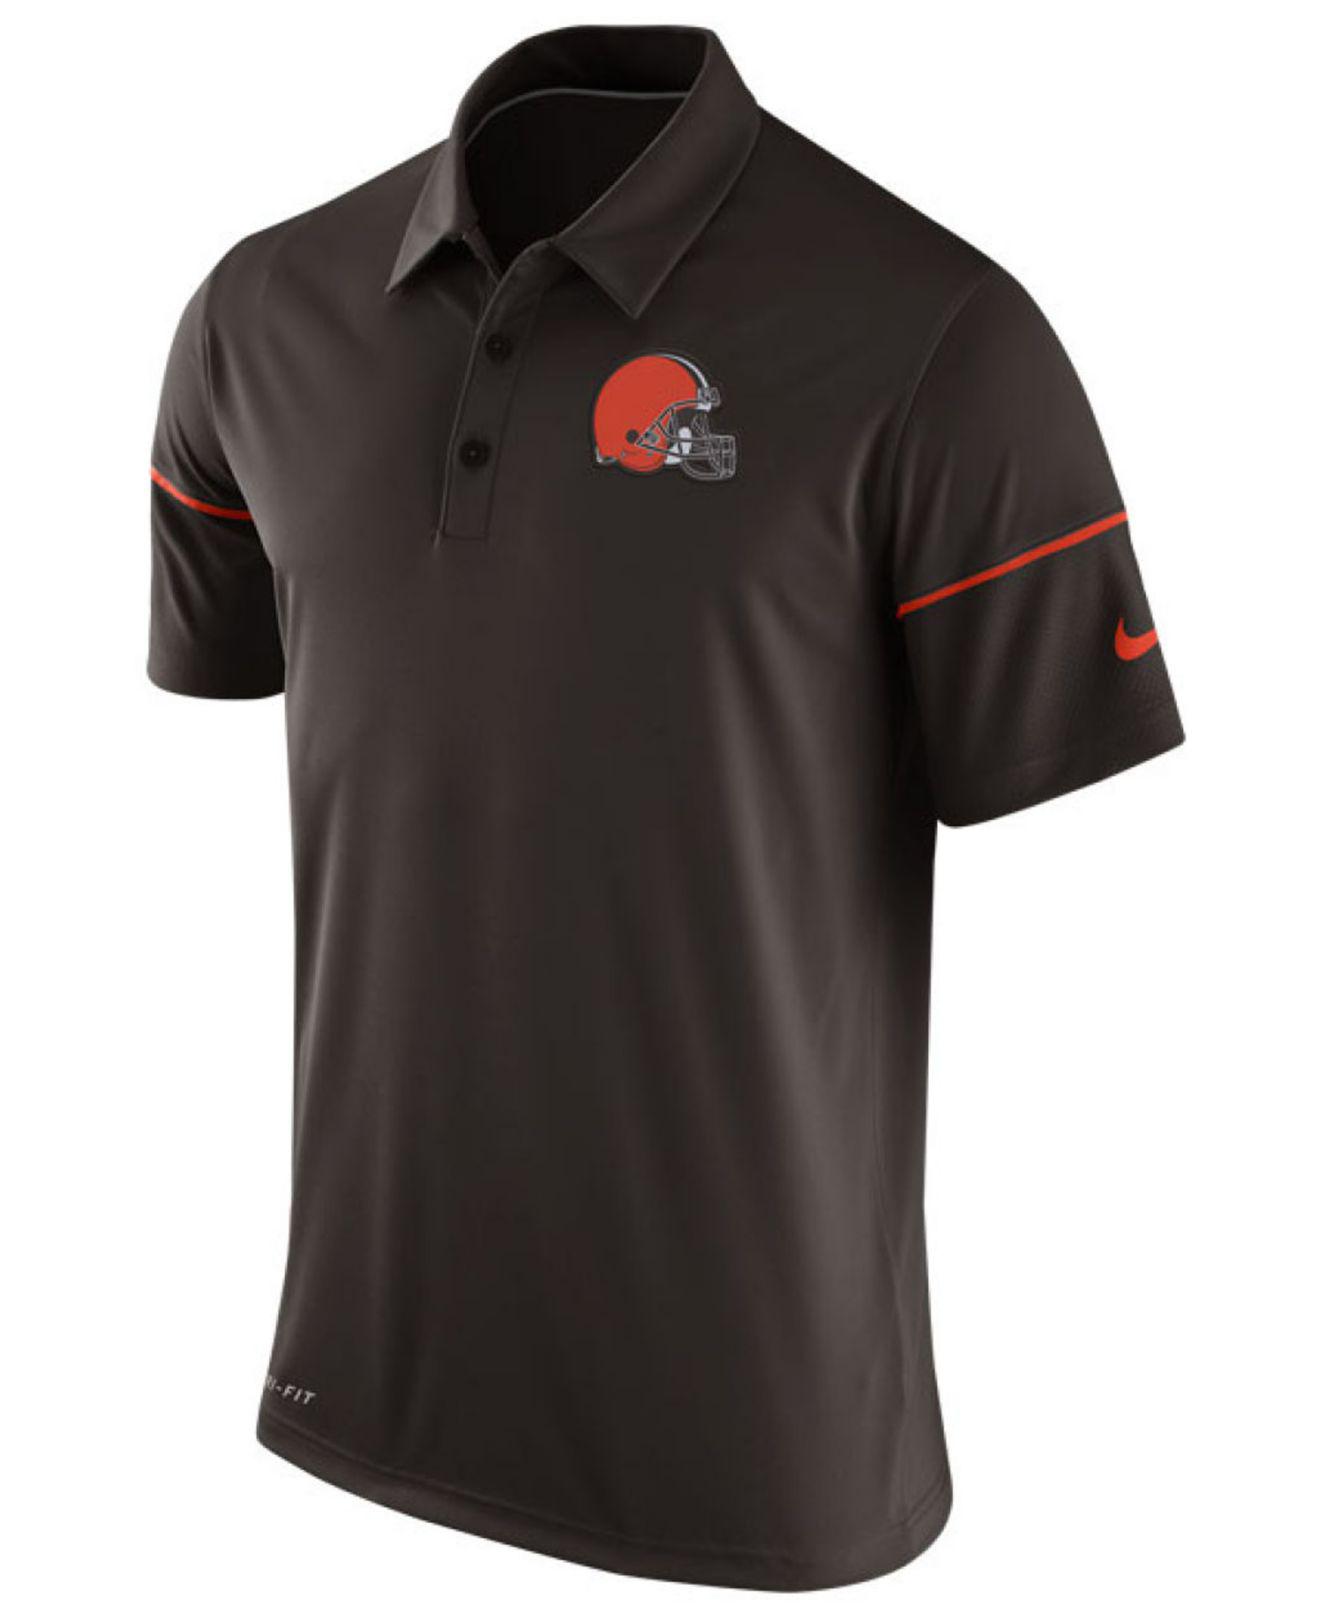 Lyst - Nike Cleveland Browns Team Issue Polo Shirt in Brown for Men